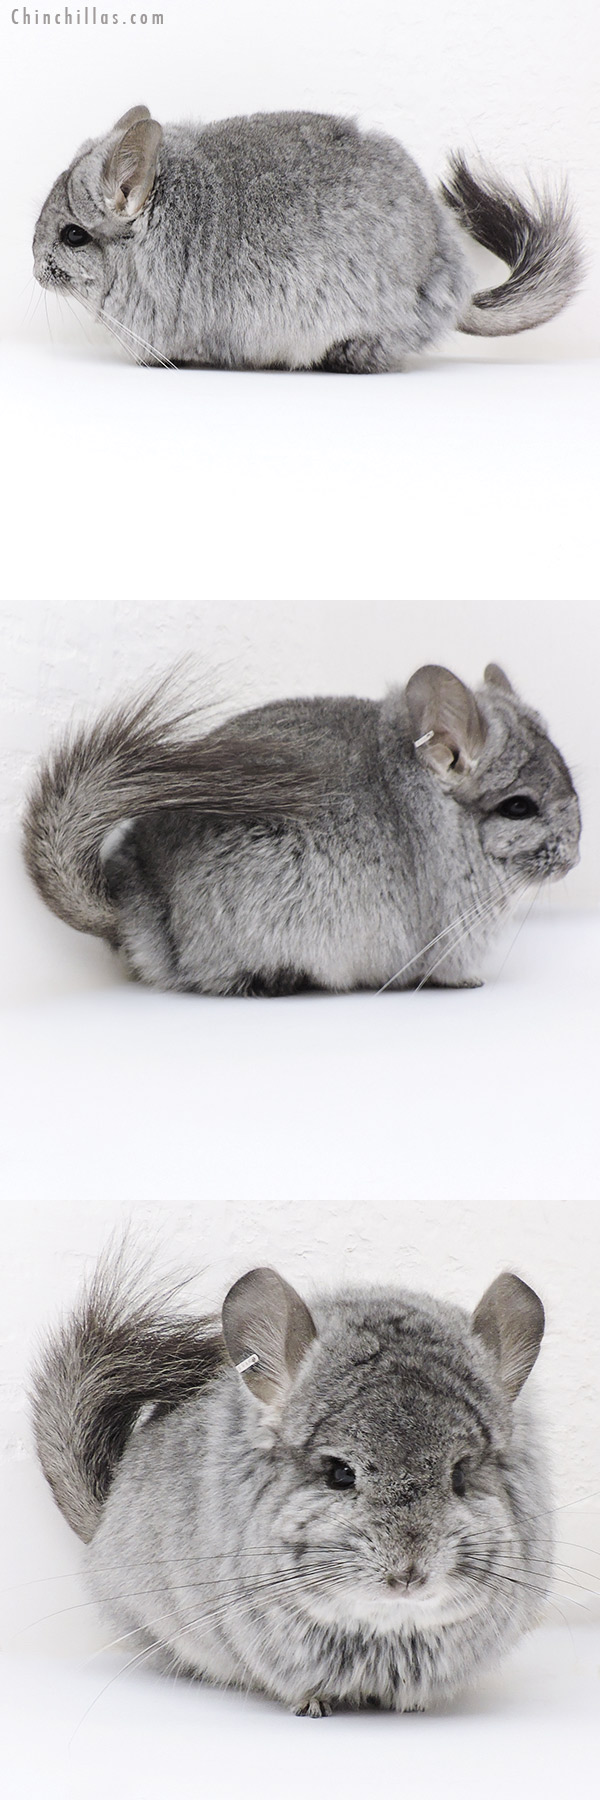 Chinchilla or related item offered for sale or export on Chinchillas.com - 18246 Standard  Royal Persian Angora ( Violet Carrier ) Female Chinchilla